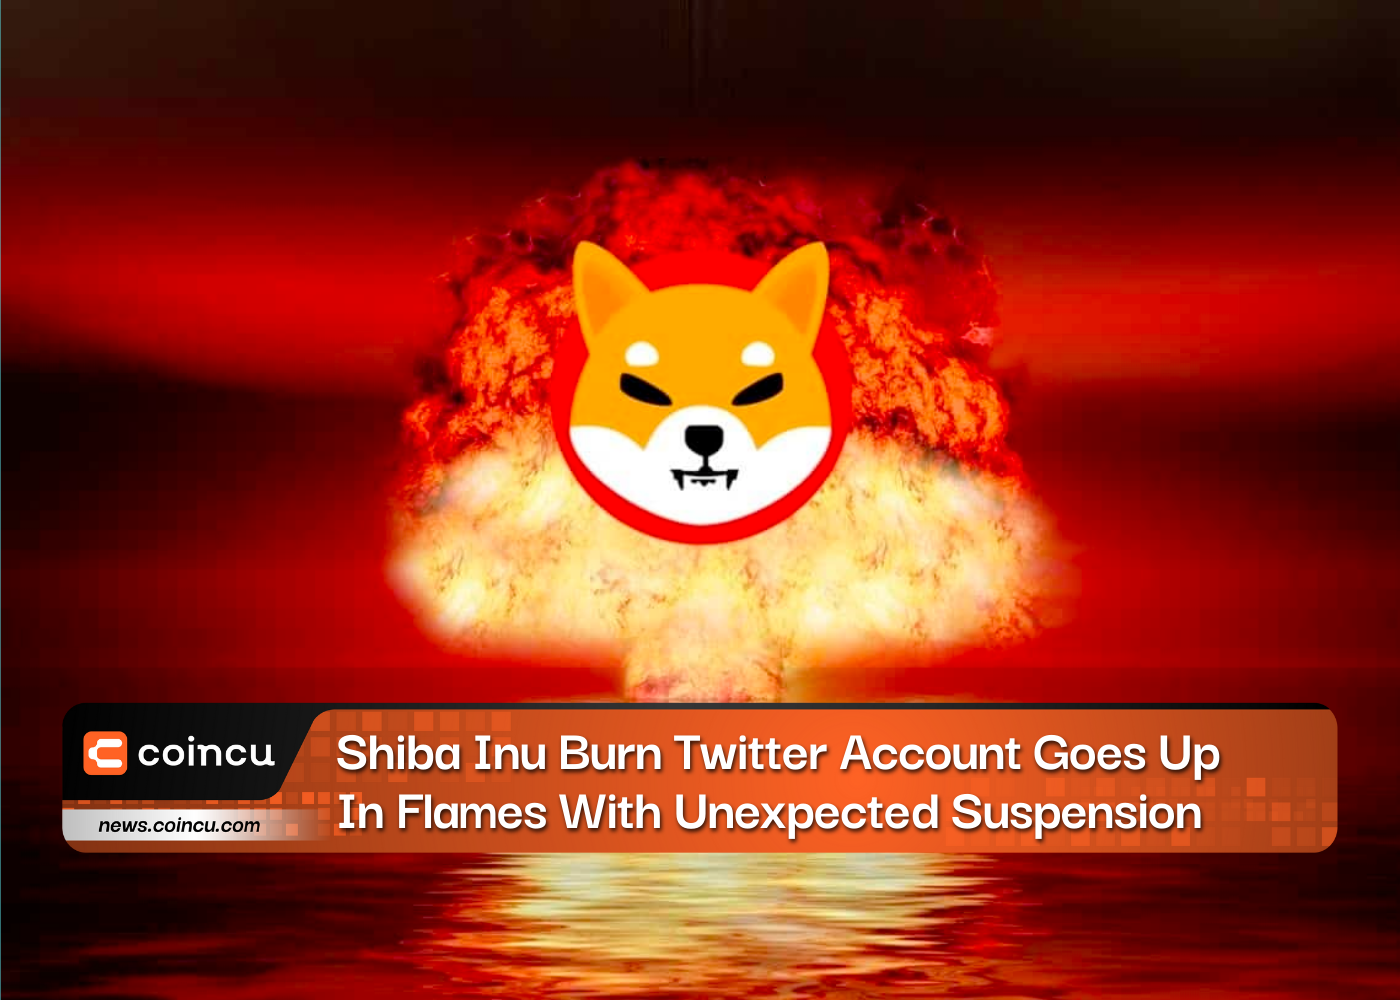 Shiba Inu Burn Twitter Account Goes Up In Flames With Unexpected Suspension